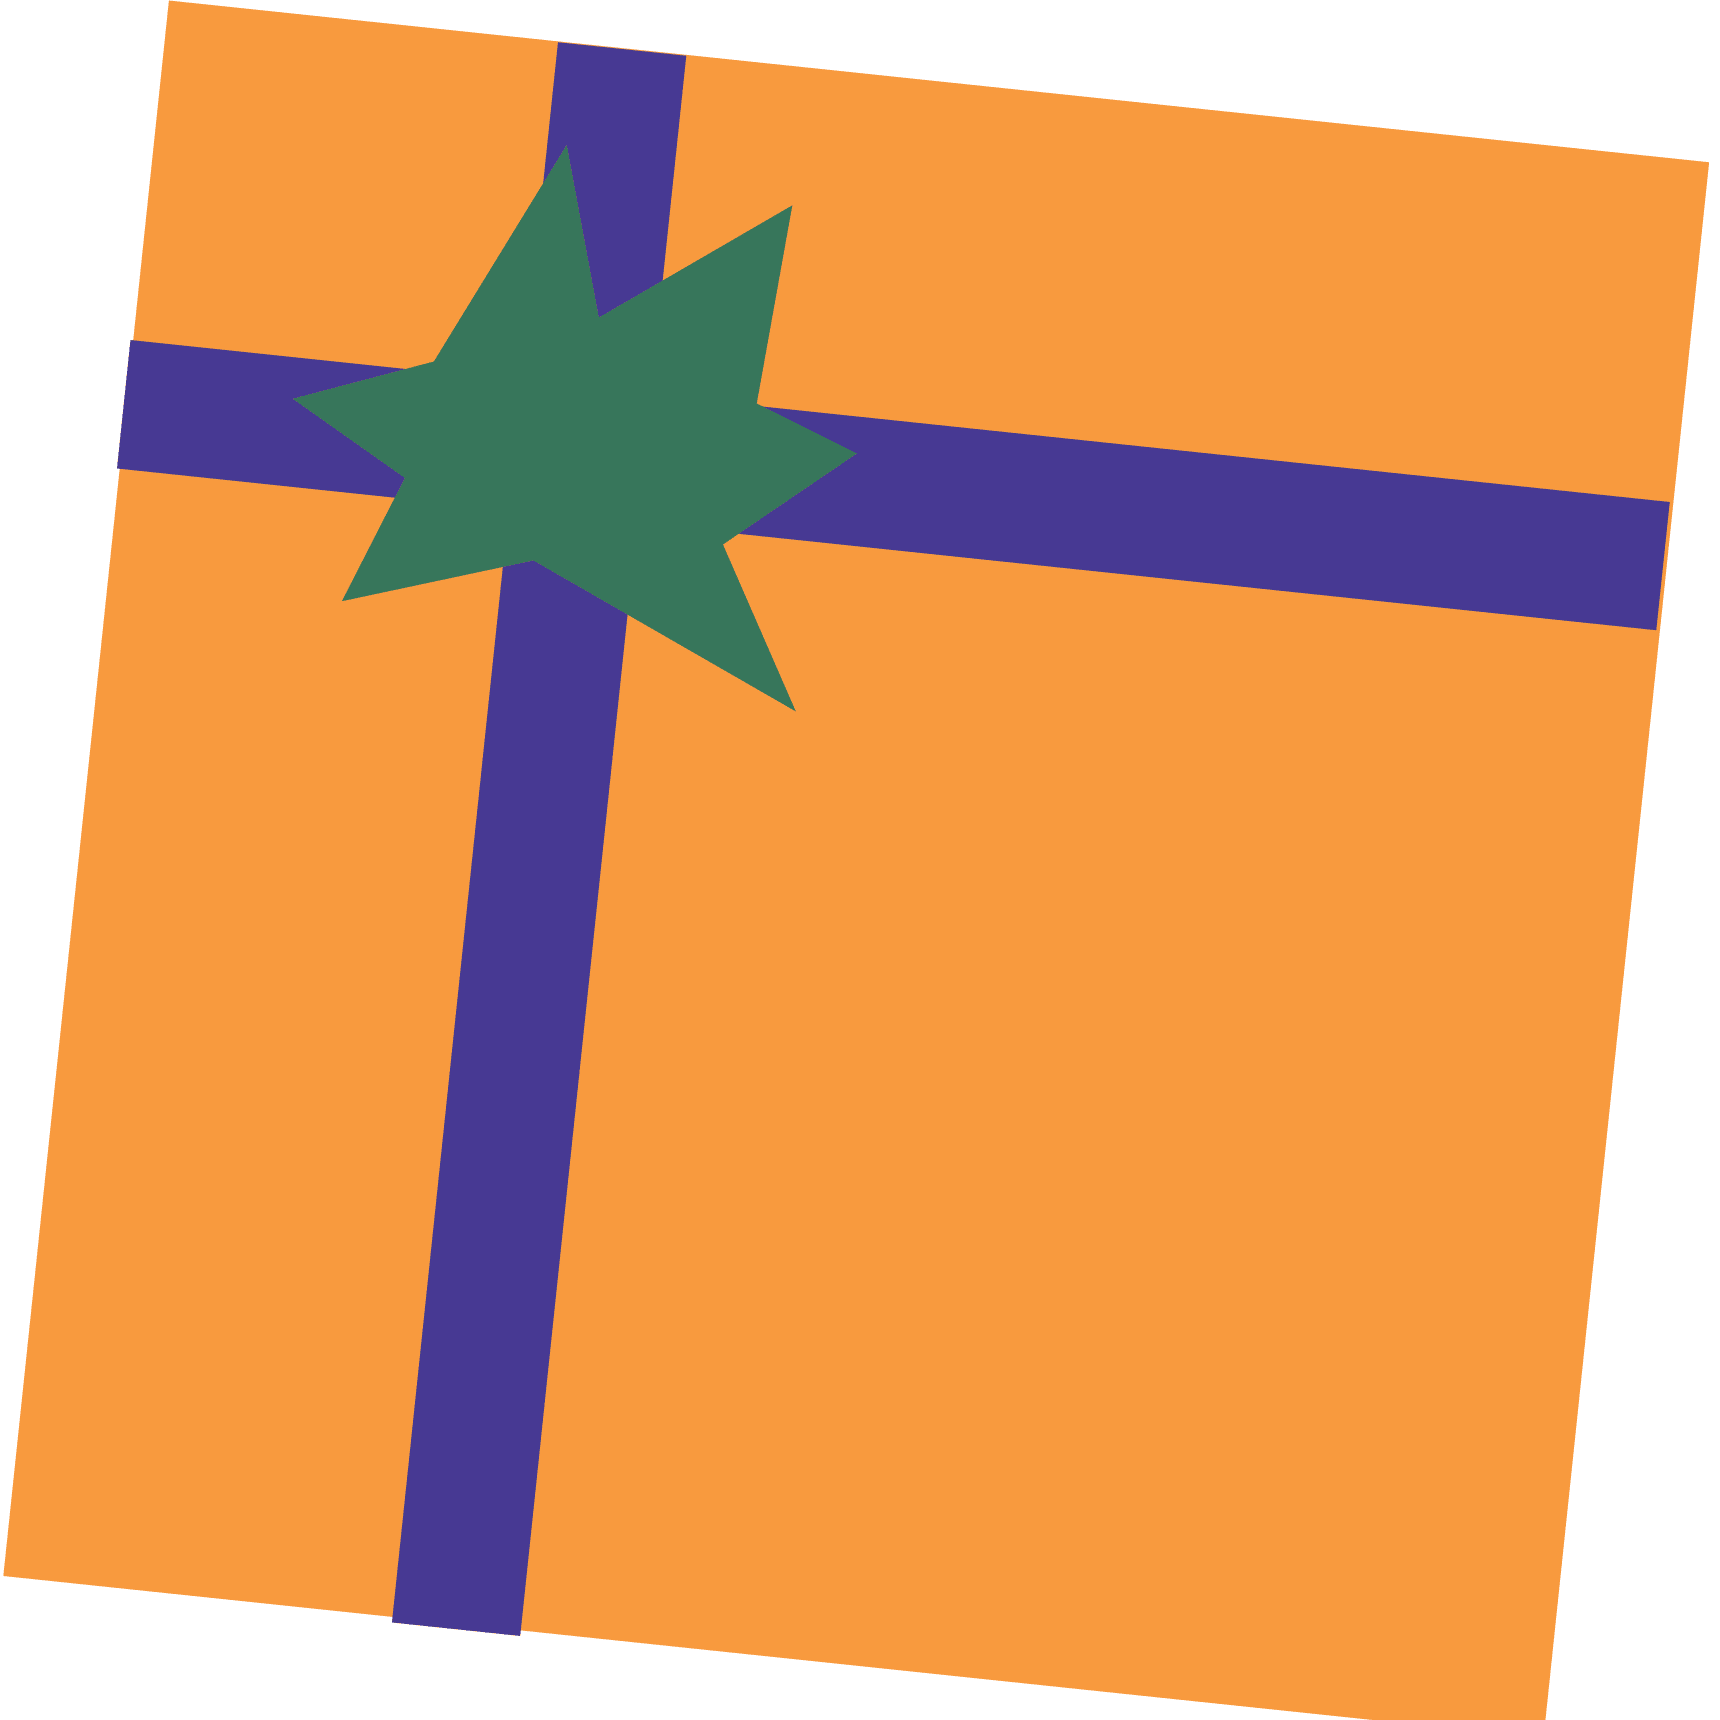 An orange present wrapped with a green bow.